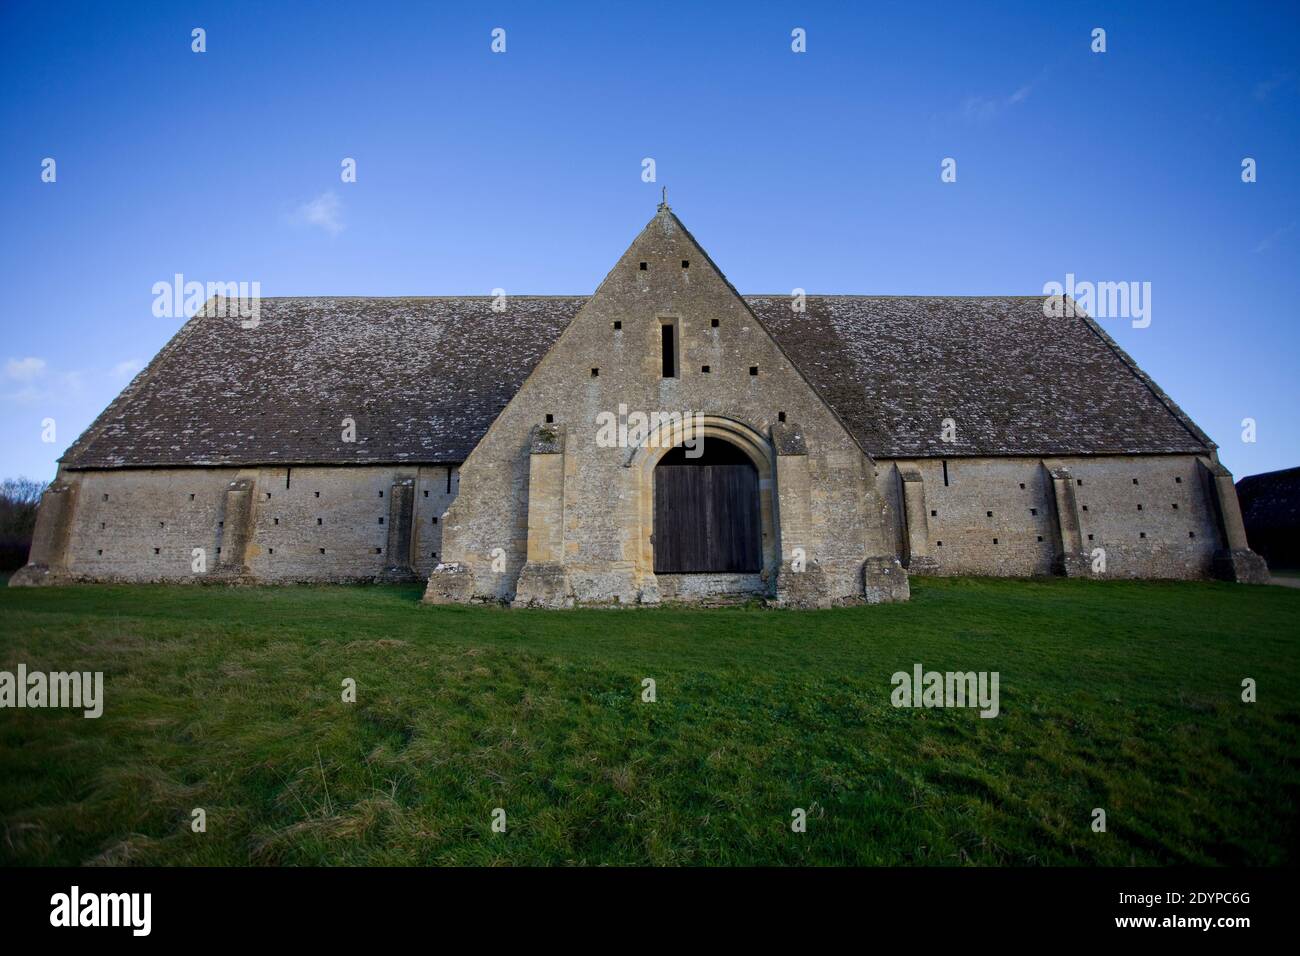 West view of Great Coxwell Tithe Barn, Oxfordshire England Stock Photo